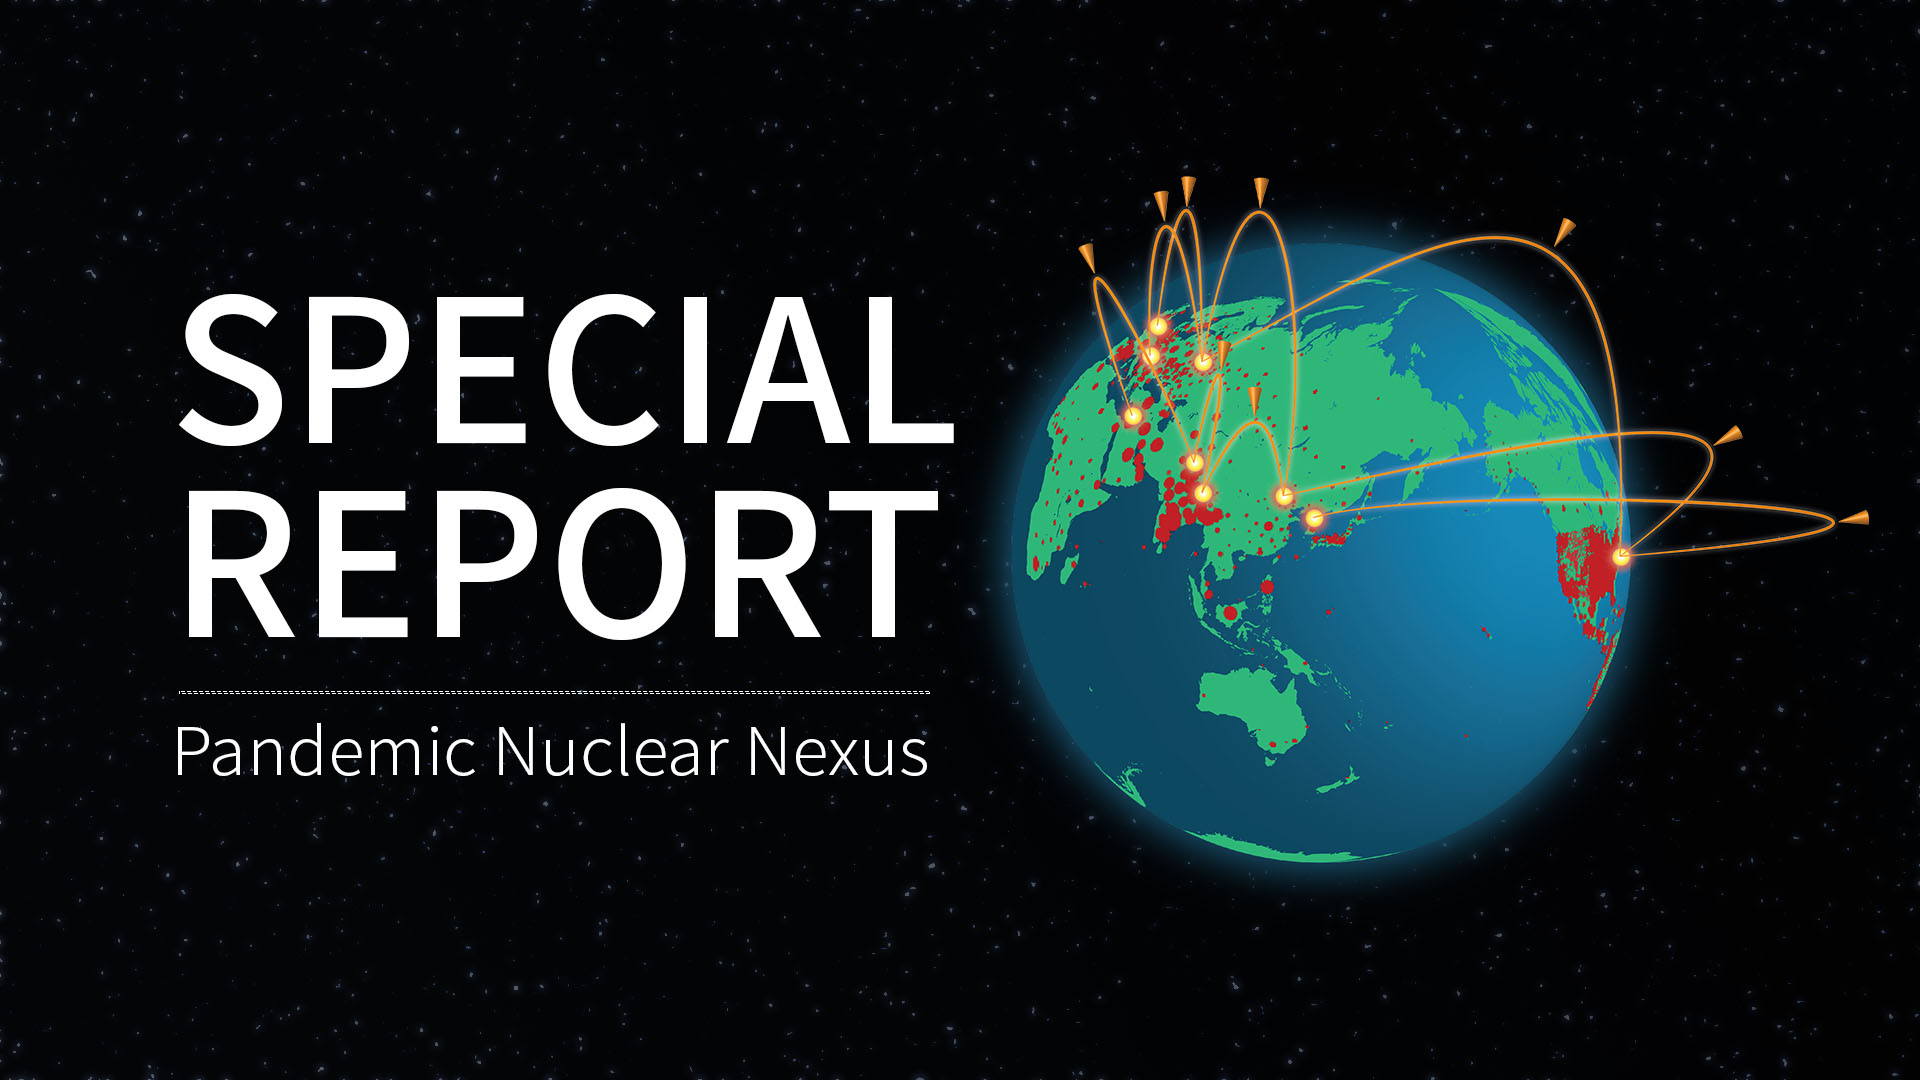 SPECIAL REPORT: Hope Becomes Law: The Treaty on the Prohibition of Nuclear Weapons